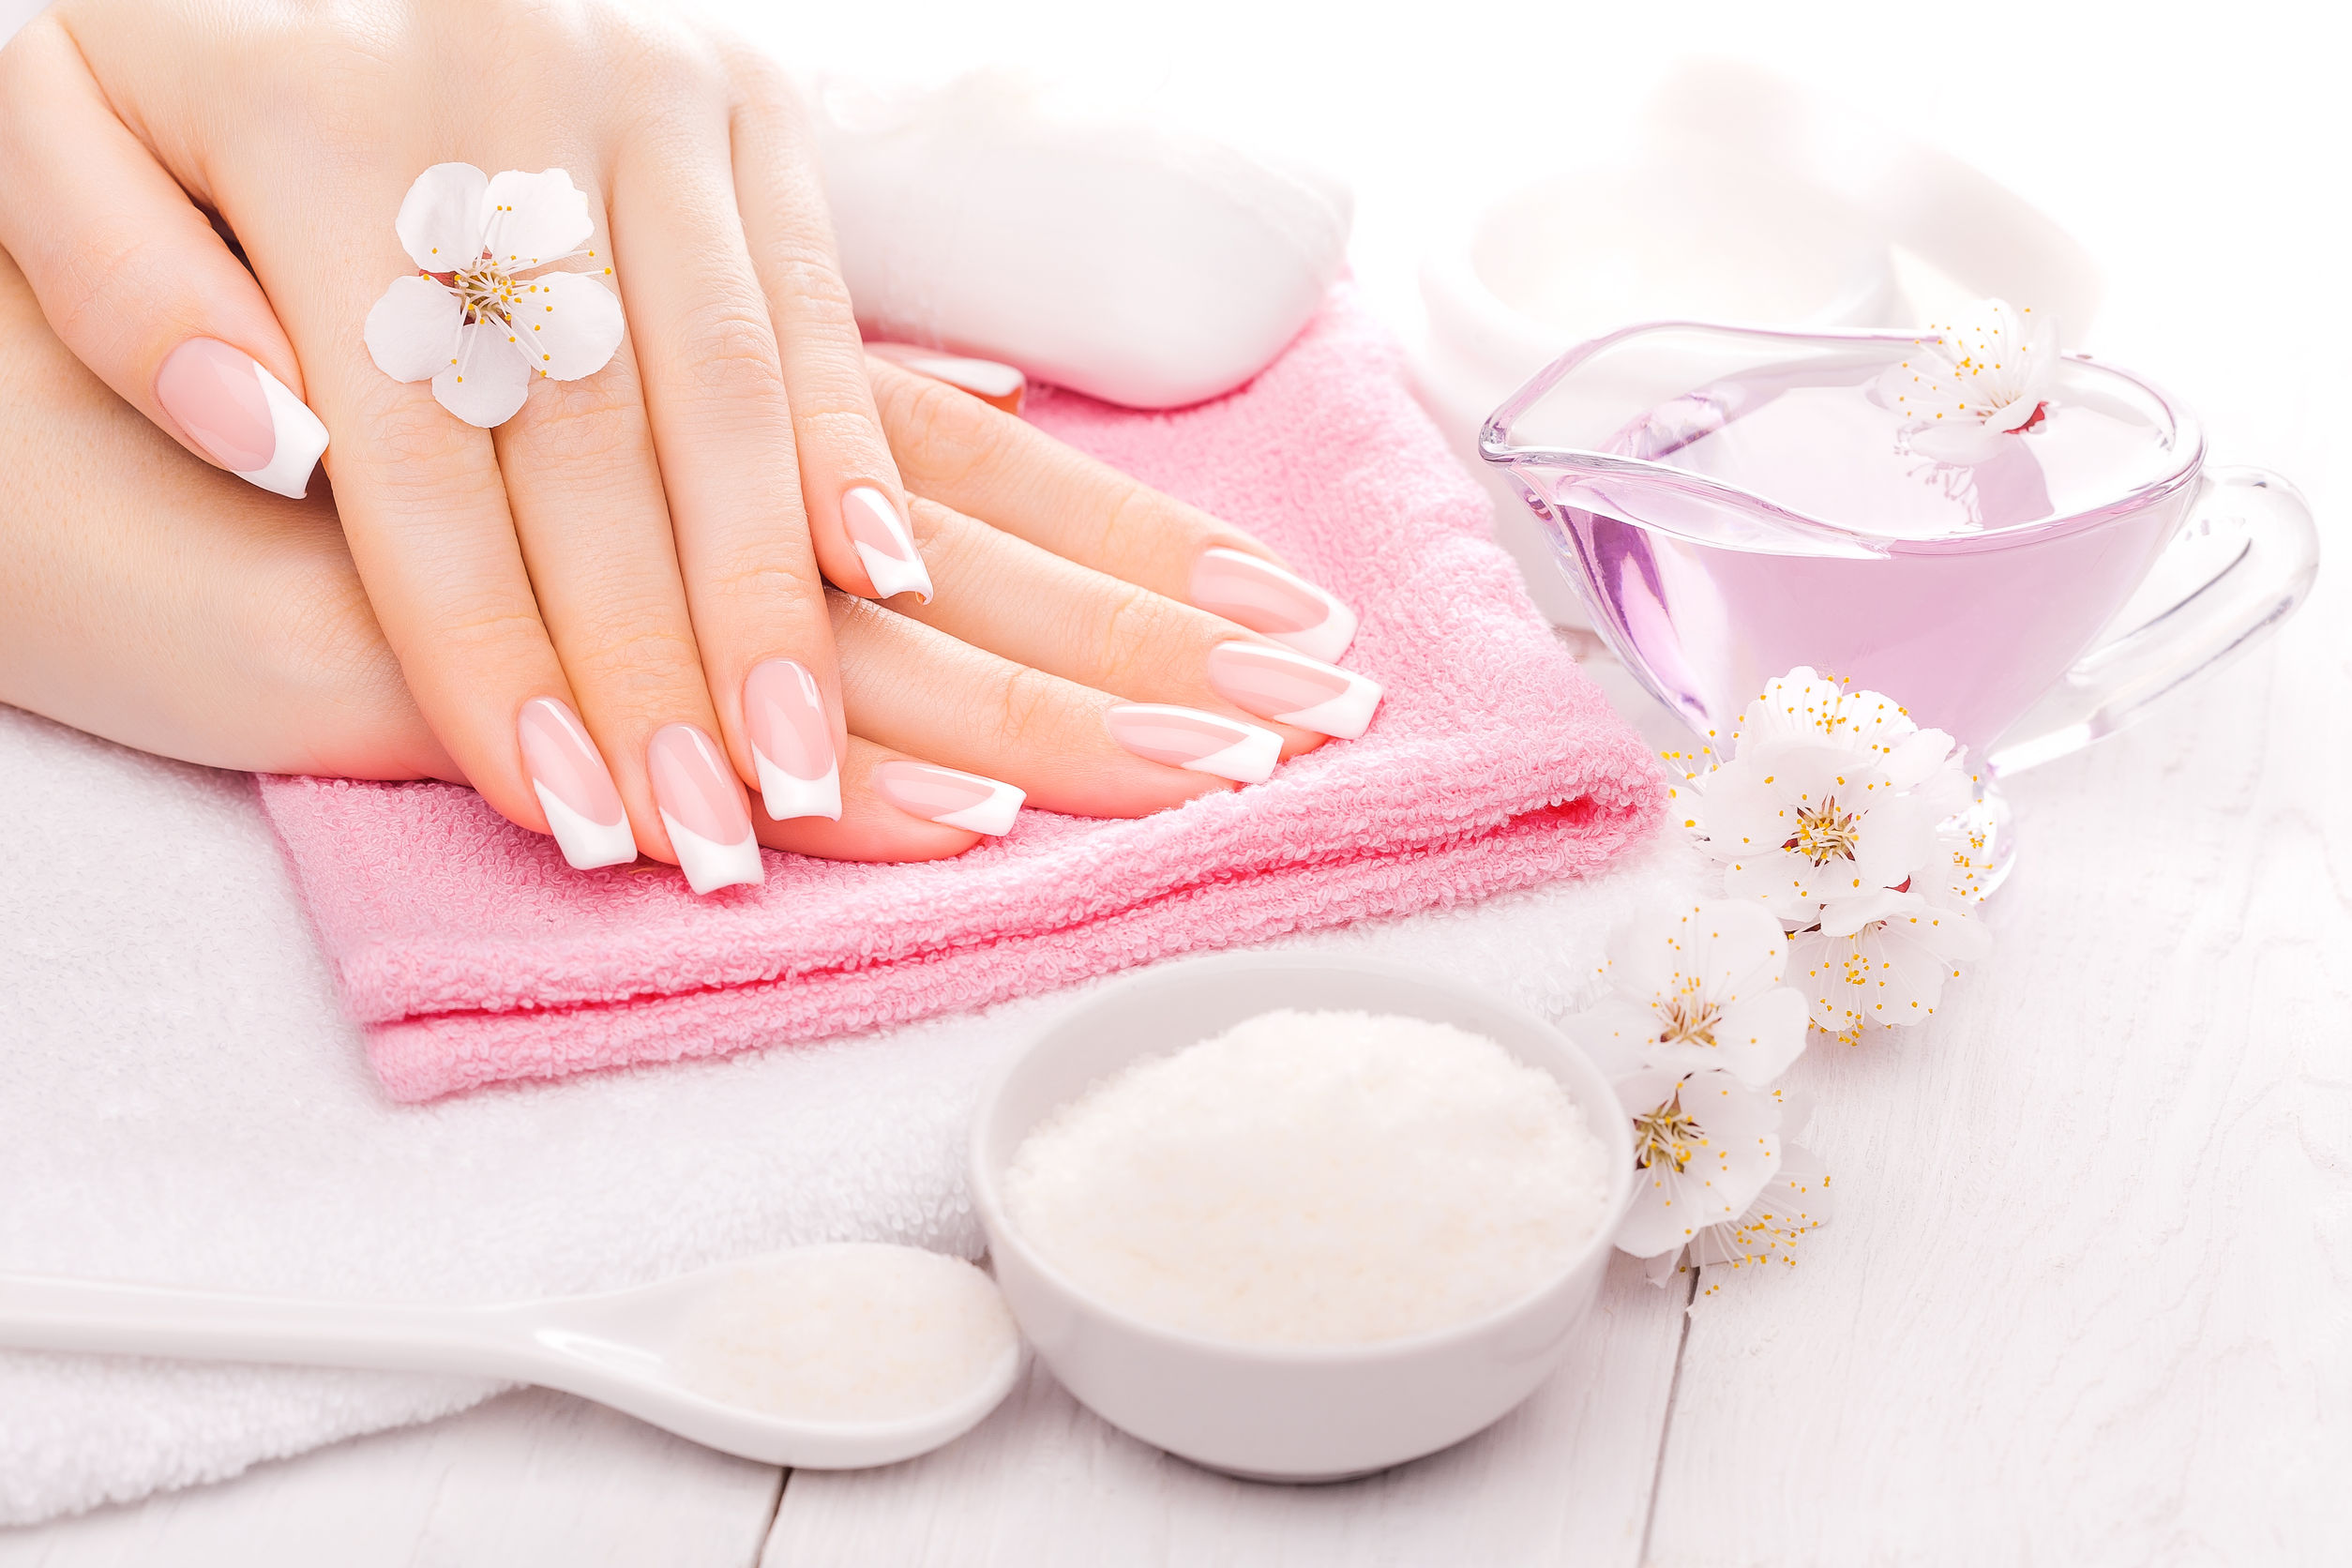 39600576 - french manicure with essential oils, apricot flowers. spa